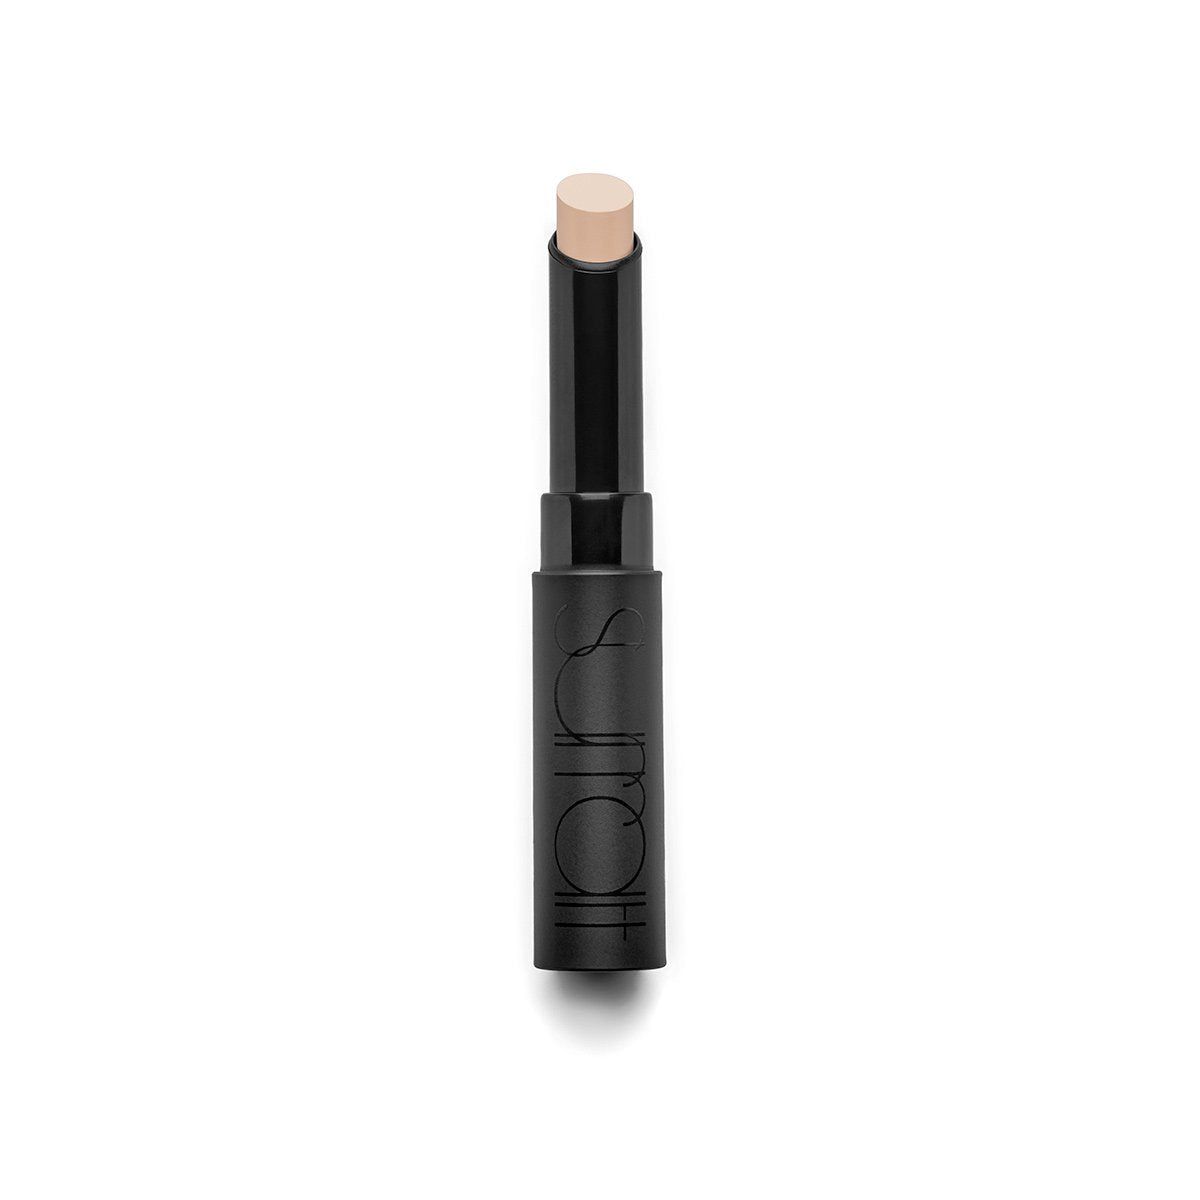 2 - FAIR TO LIGHT WITH NEUTRAL UNDERTONES - full-coverage cream concealer stick in fair to light with neutral undertones shade two